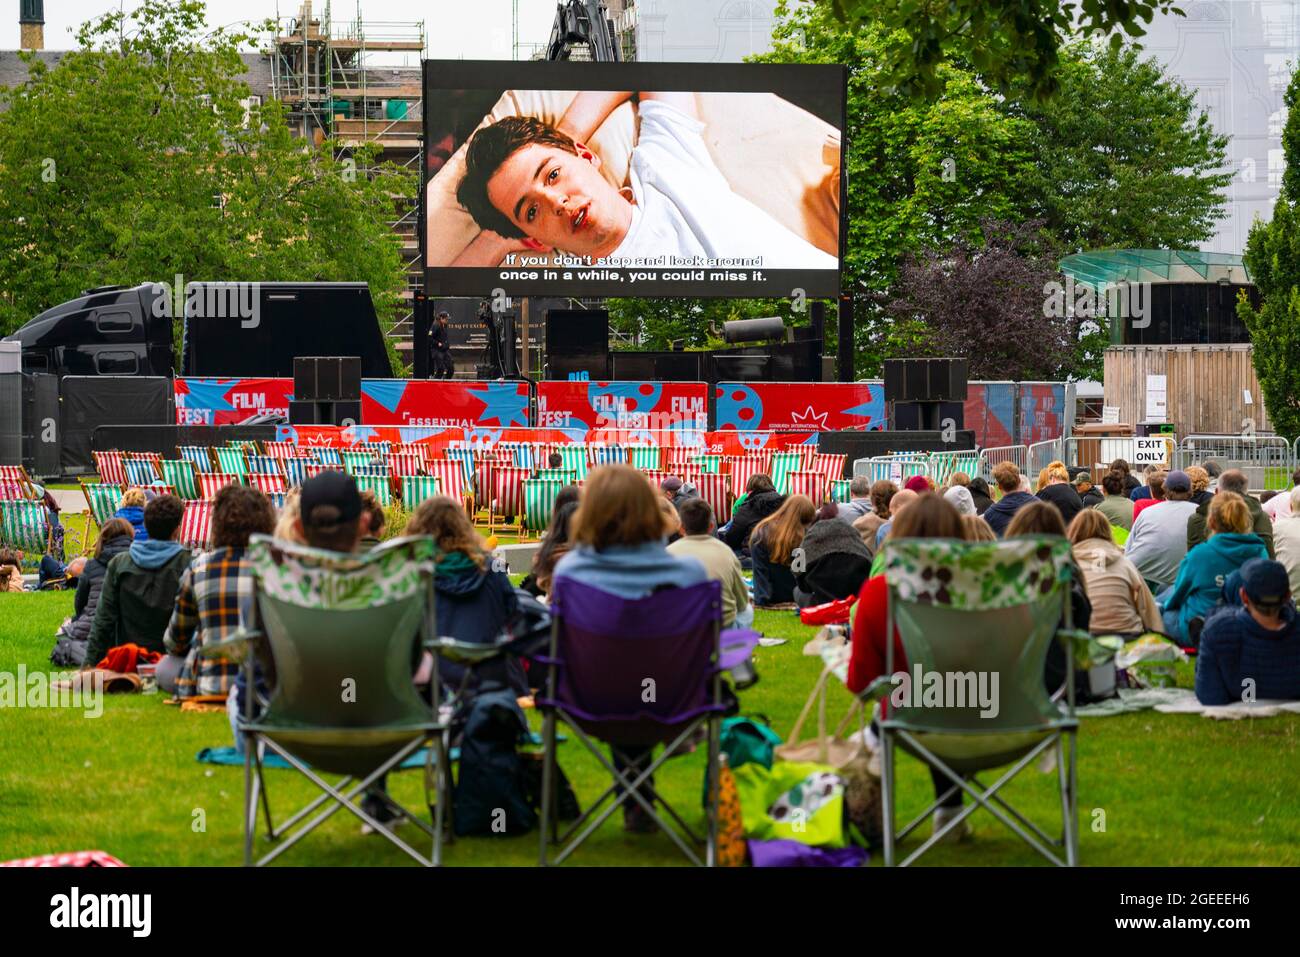 International Film Festival High Resolution Stock Photography and Images -  Alamy